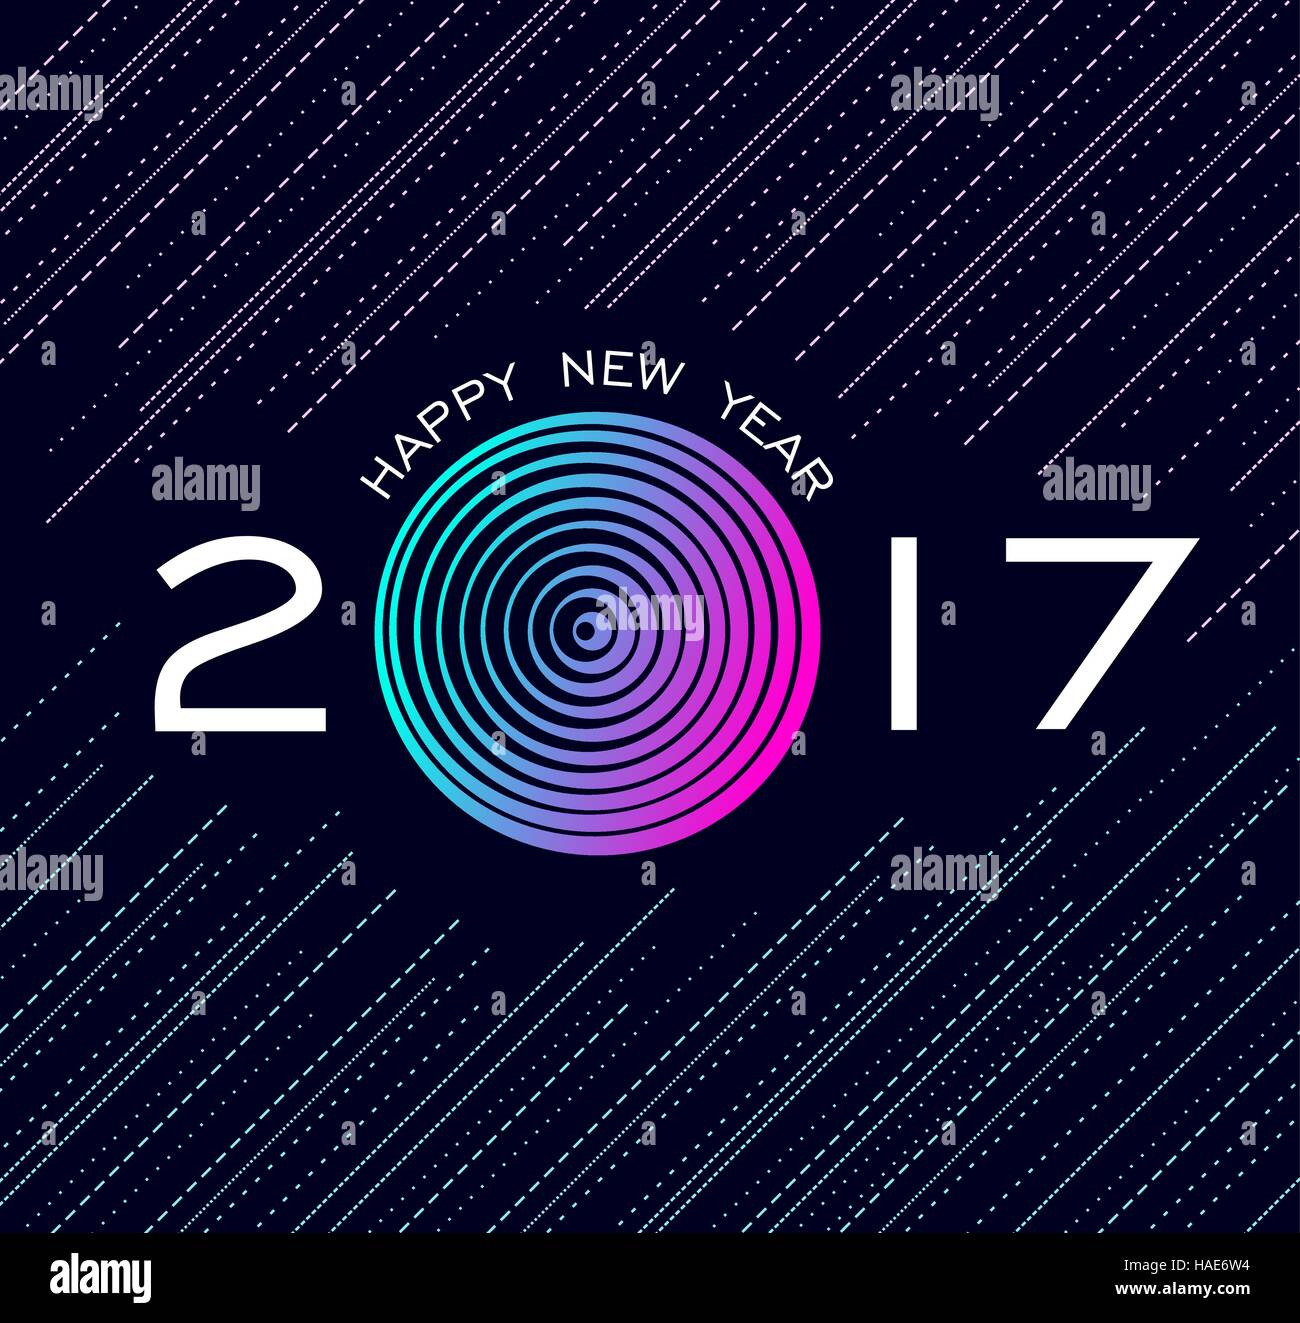 Happy New Year 2017 greeting card with colorful night design, numbers and geometric background. EPS10 vector. Stock Vector